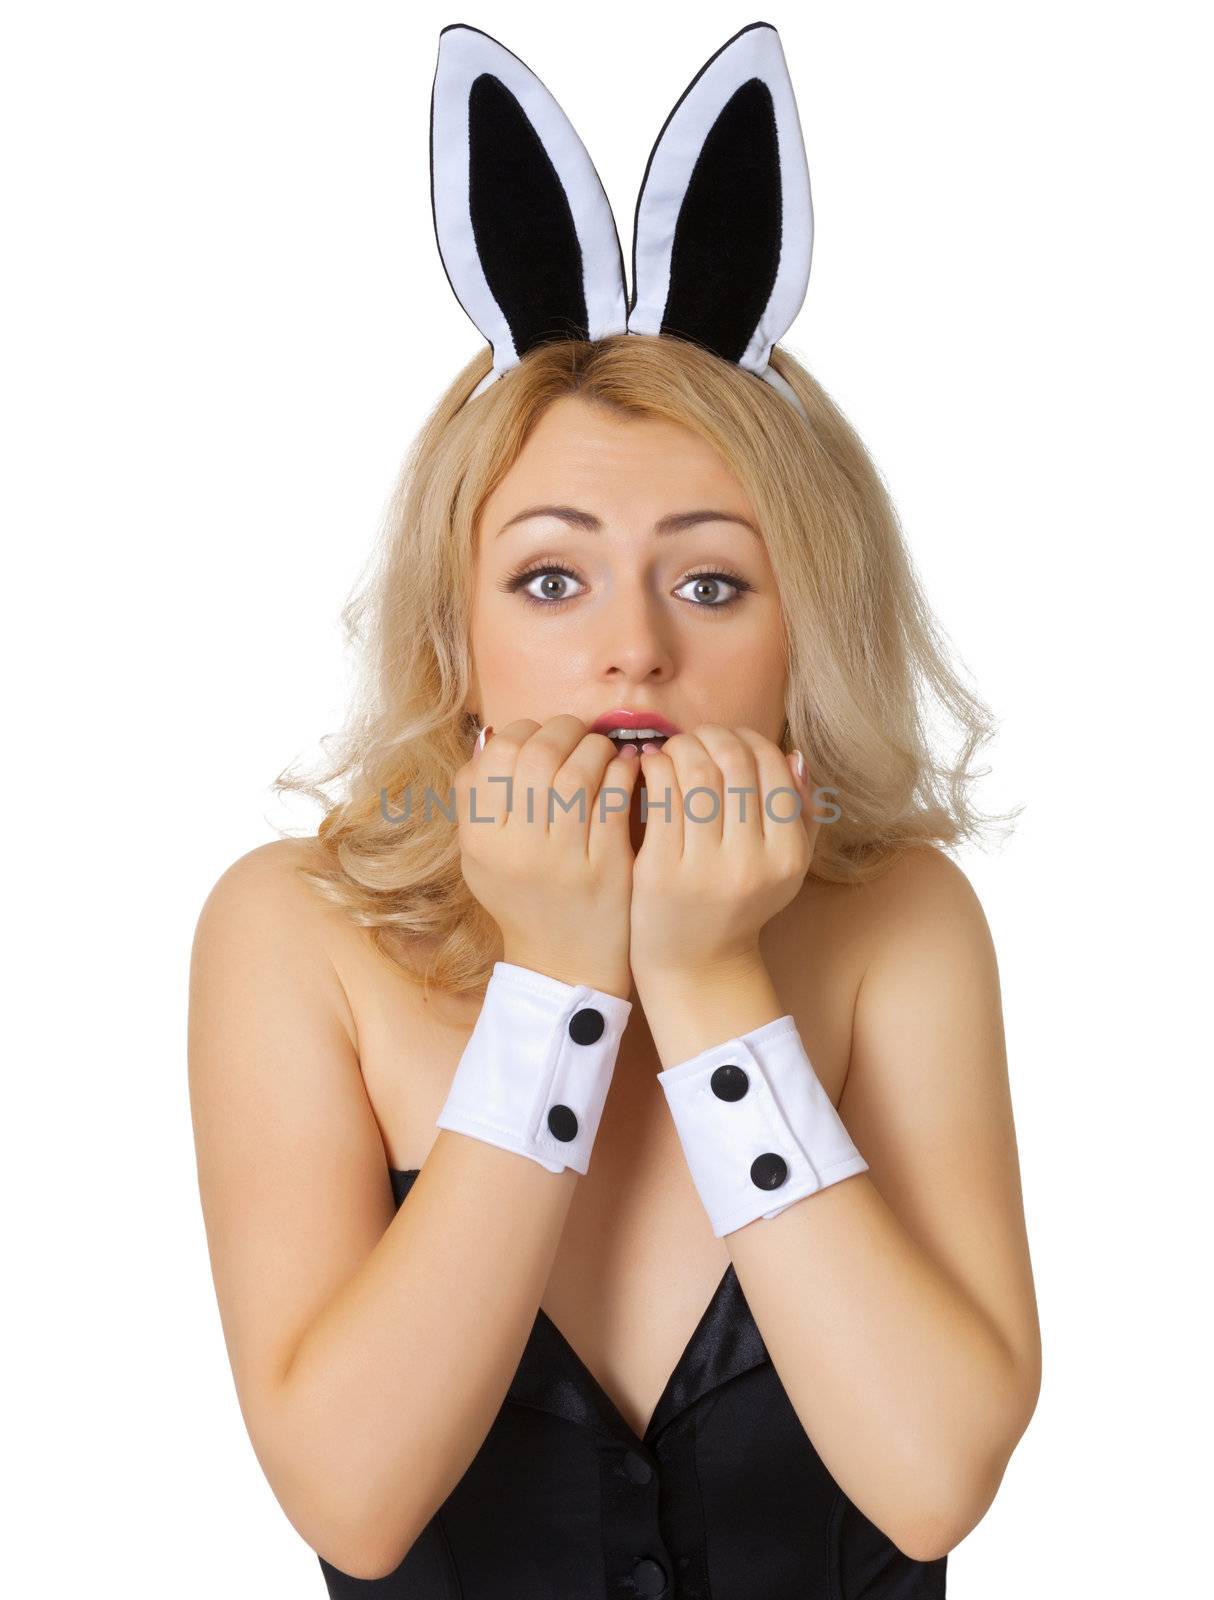 The frightened young girl dressed as a rabbit isolated on white background